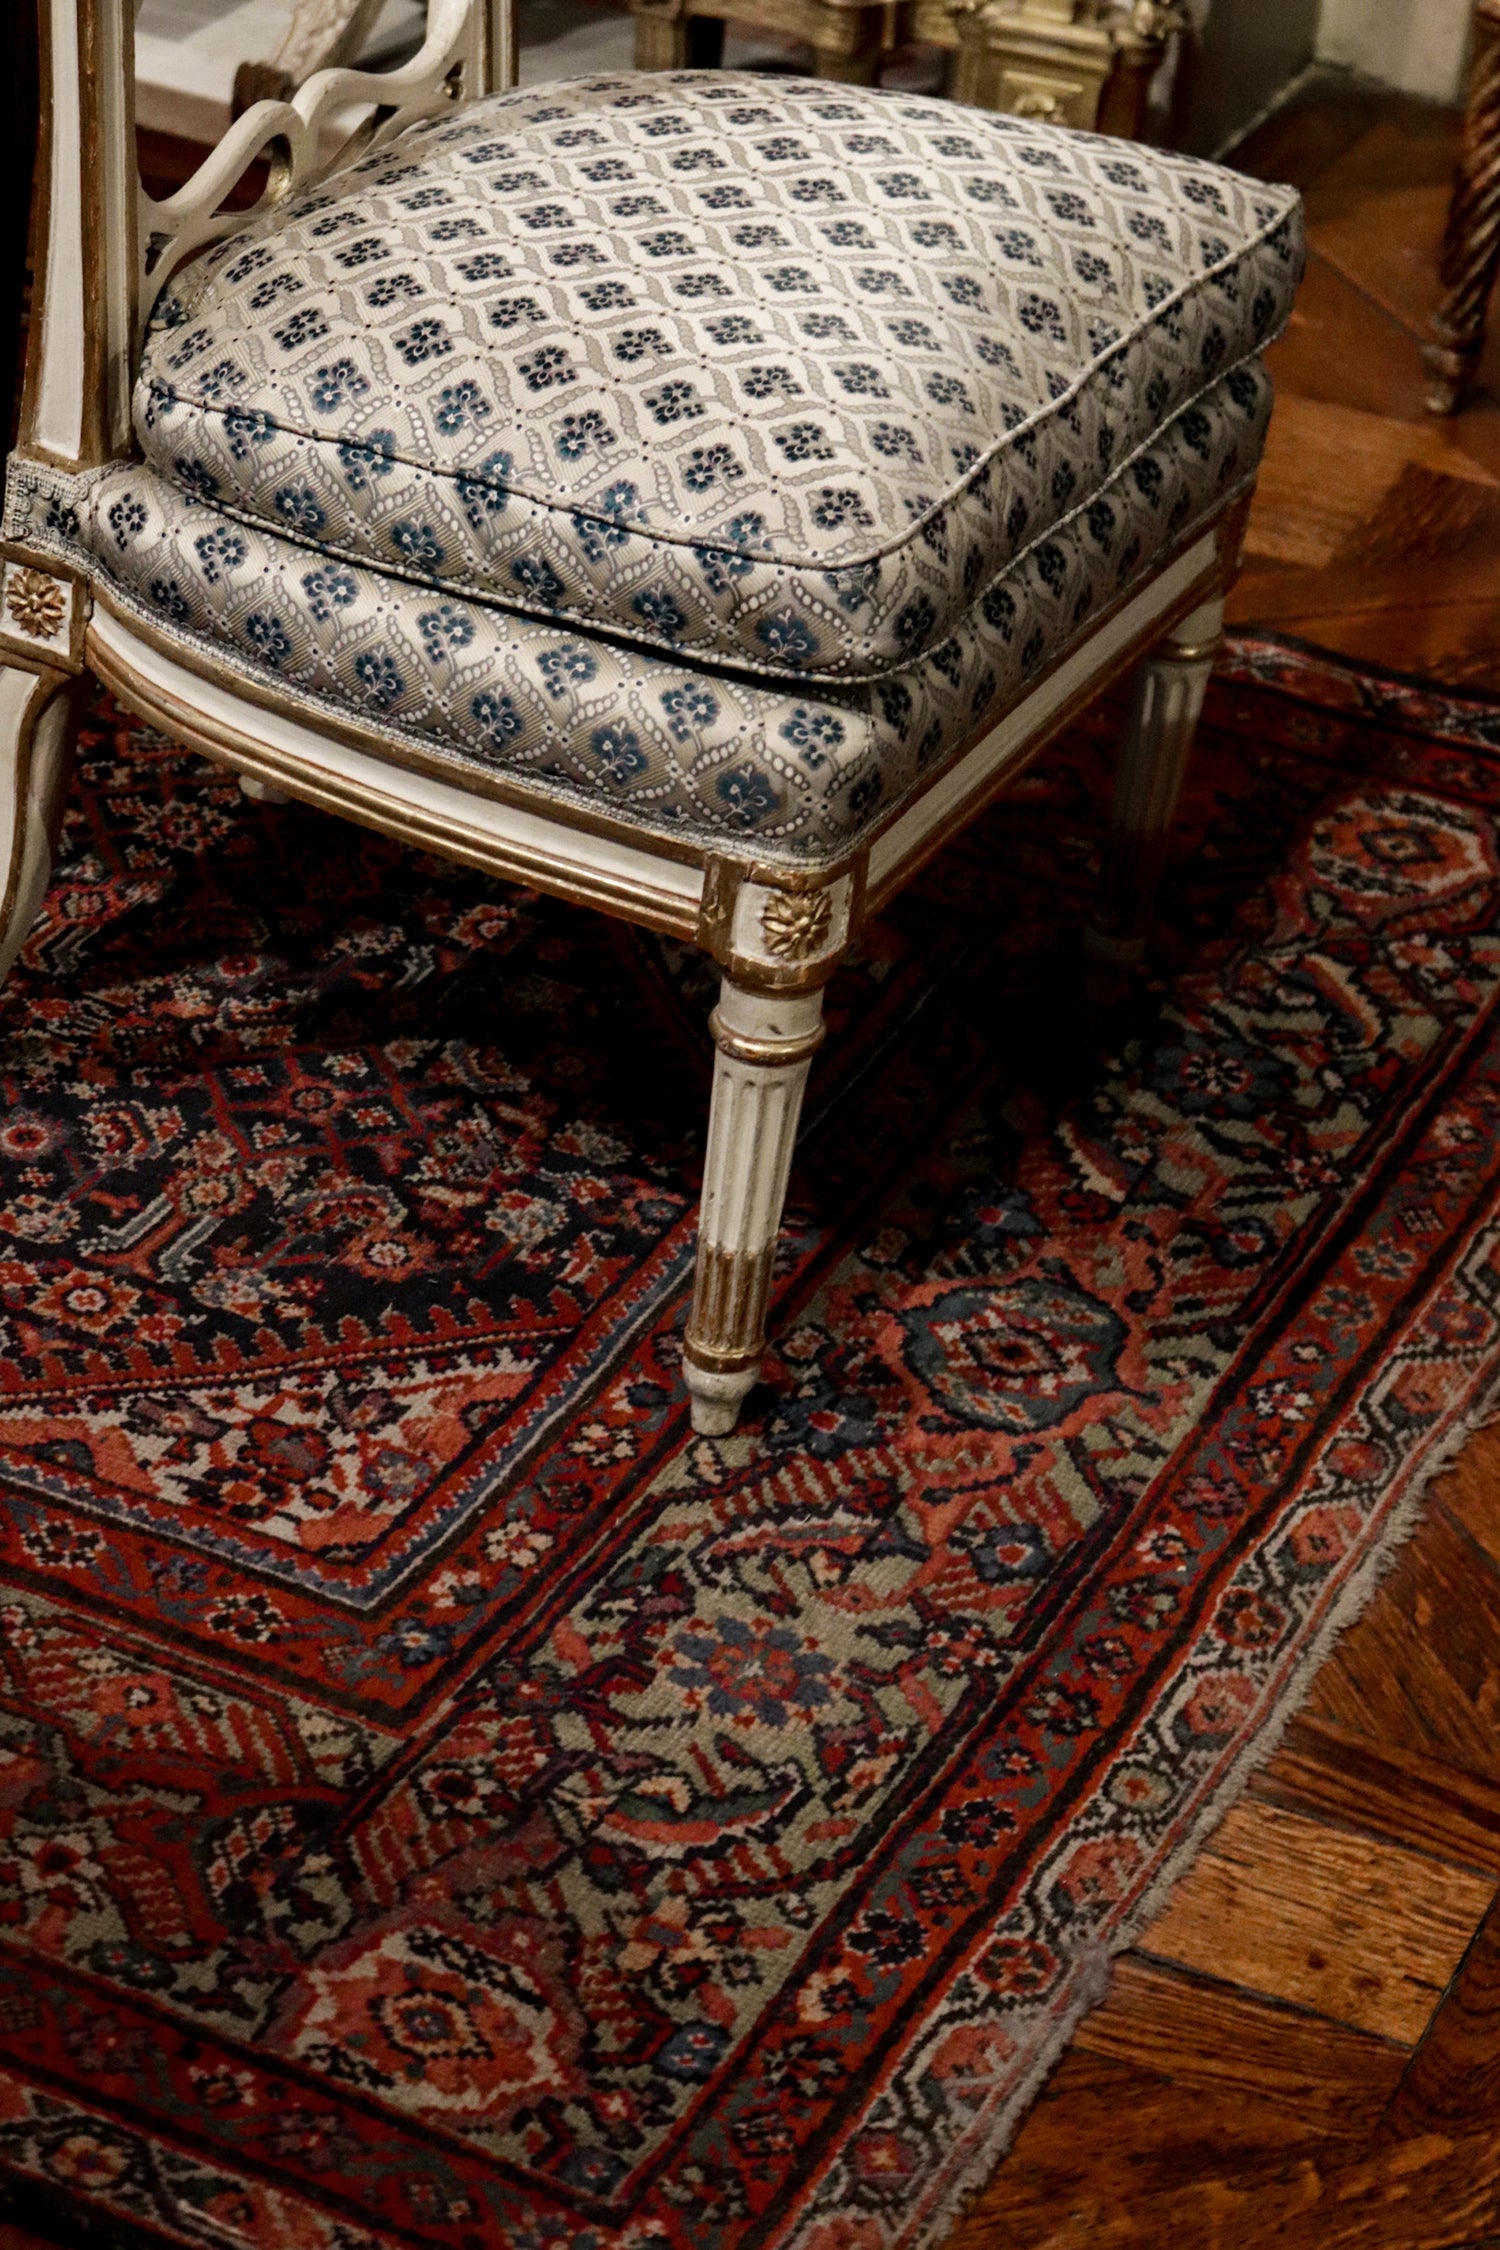 Antique and vintage rugs with soft furnishings, scatter cushions and throws